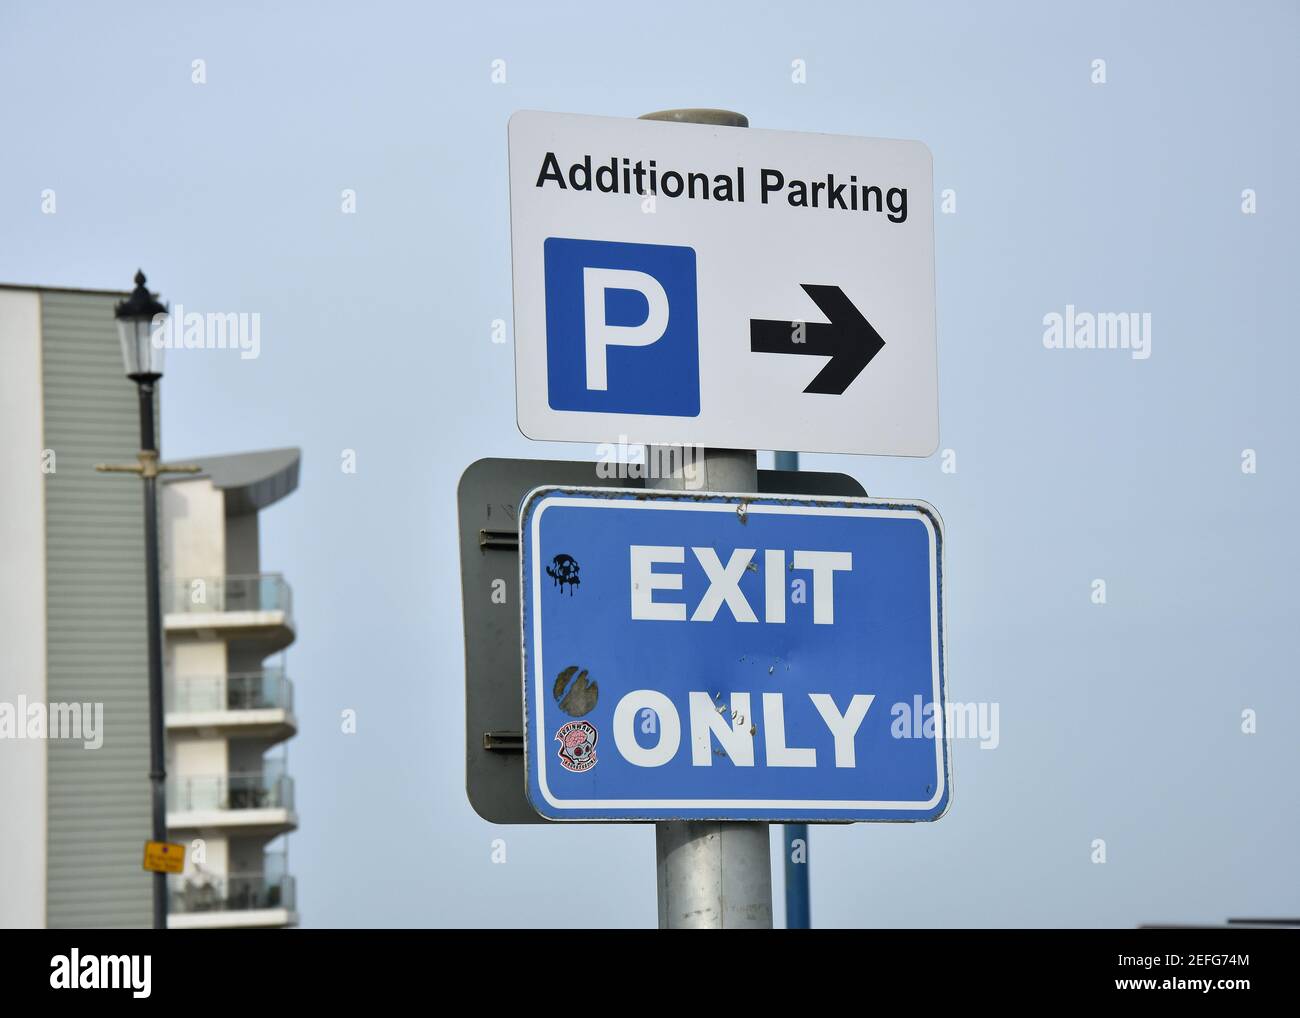 UK Road Signs as found on streets of North Devon, P, Parking, Exit Only Stock Photo